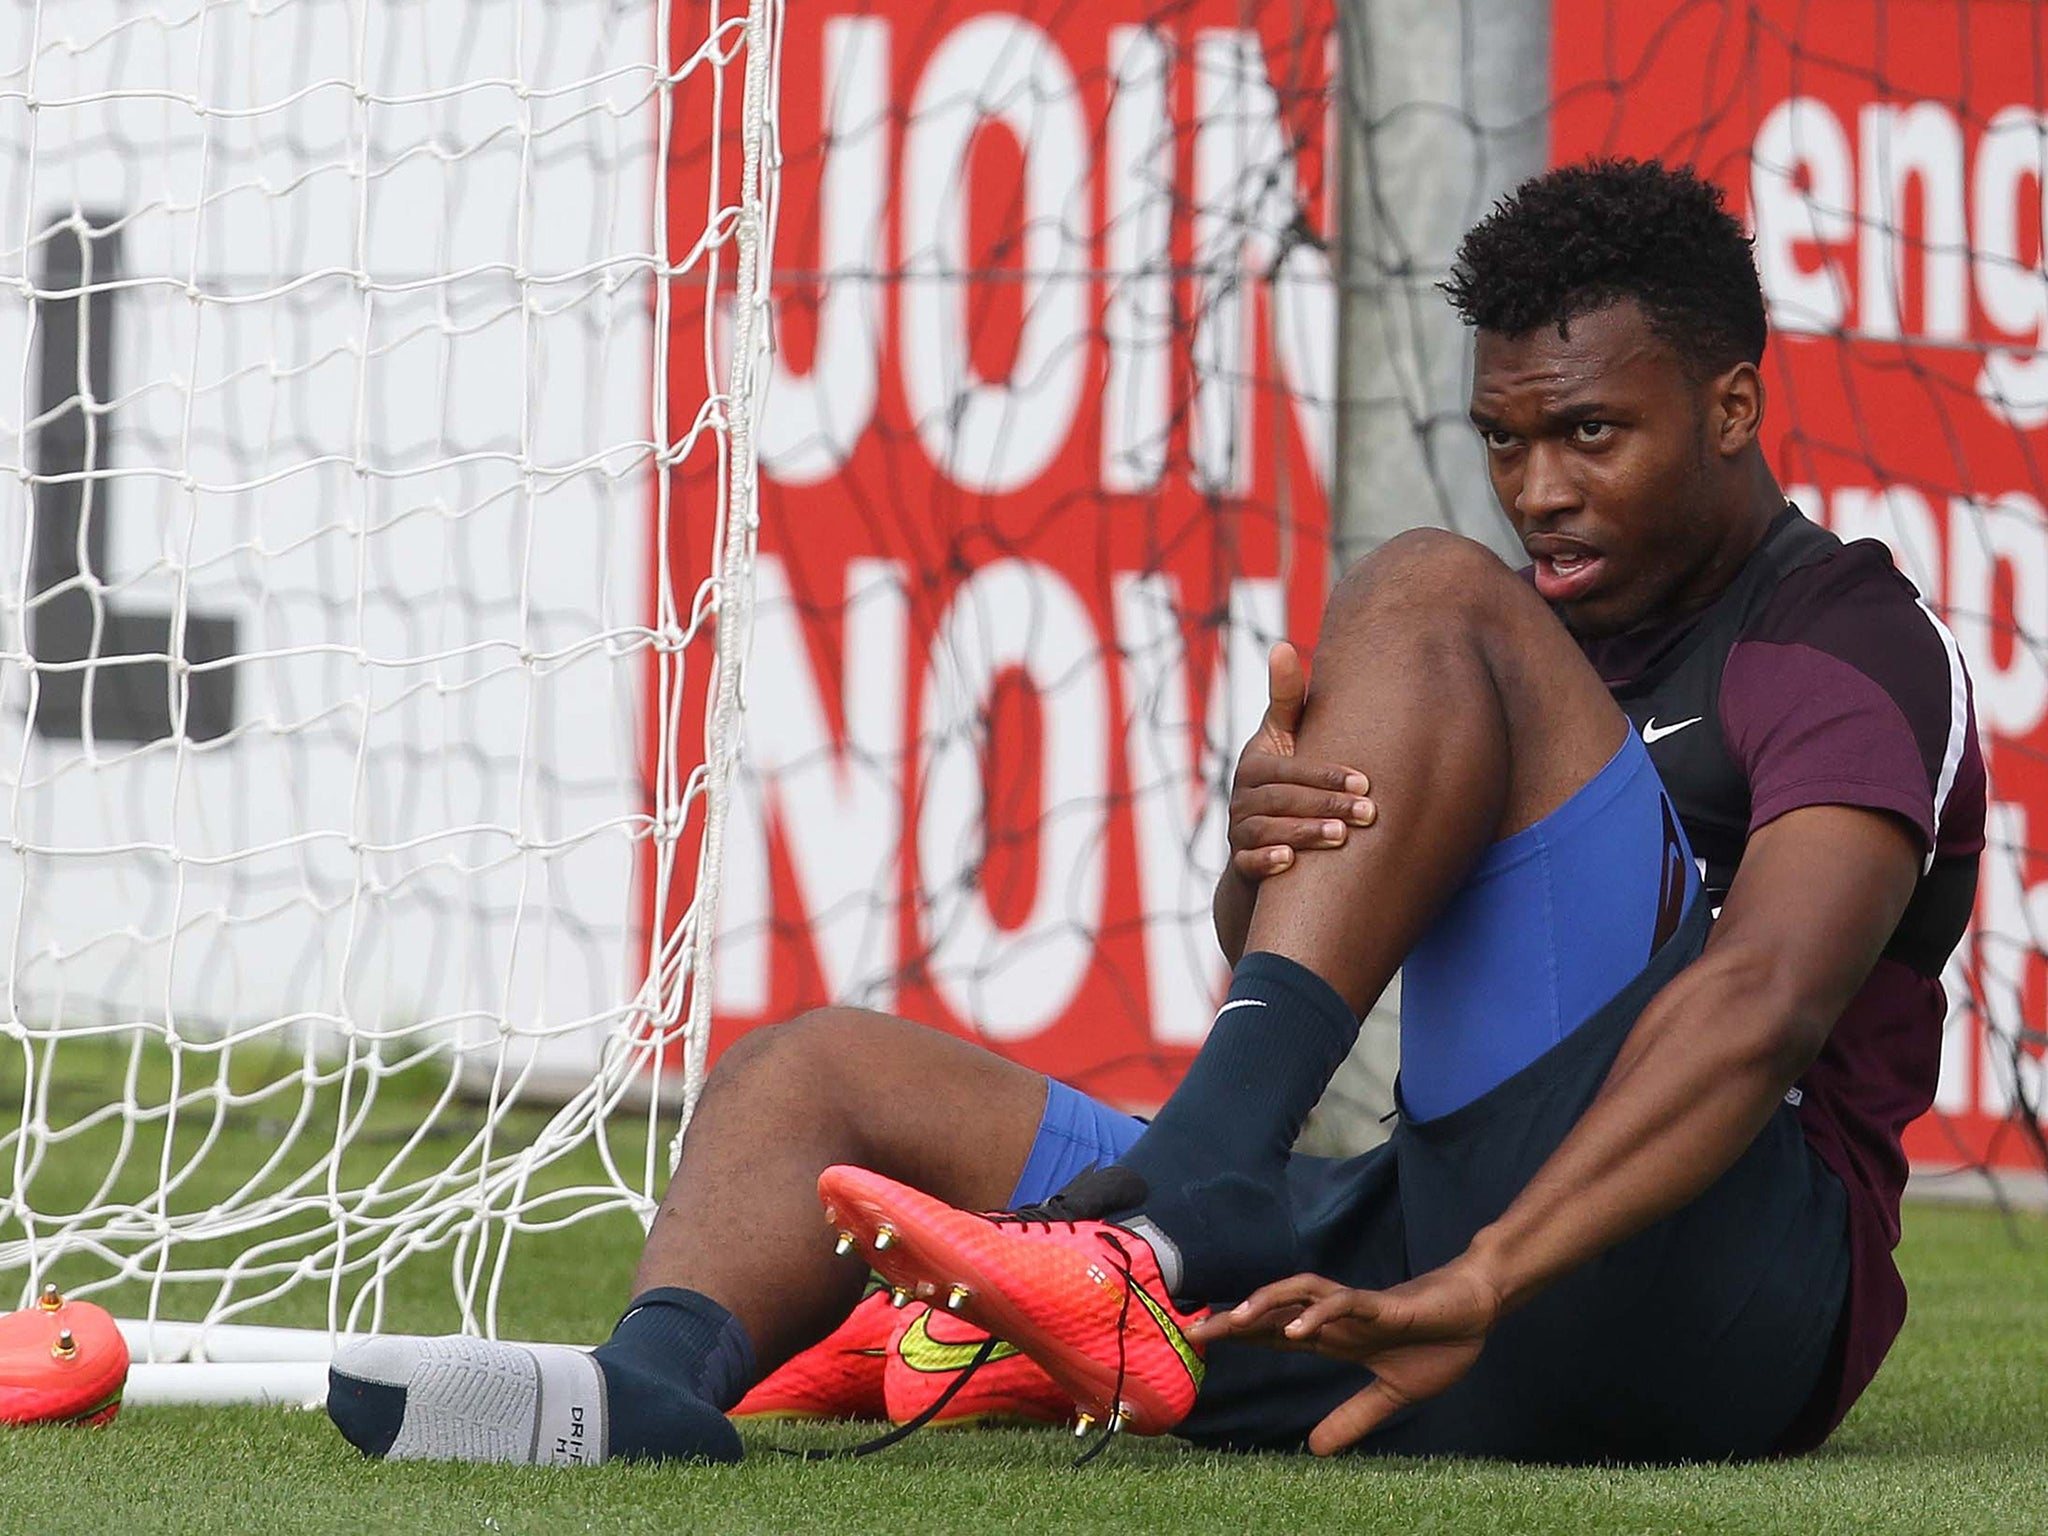 Daniel Sturridge picked up a thigh strain while training with England last month